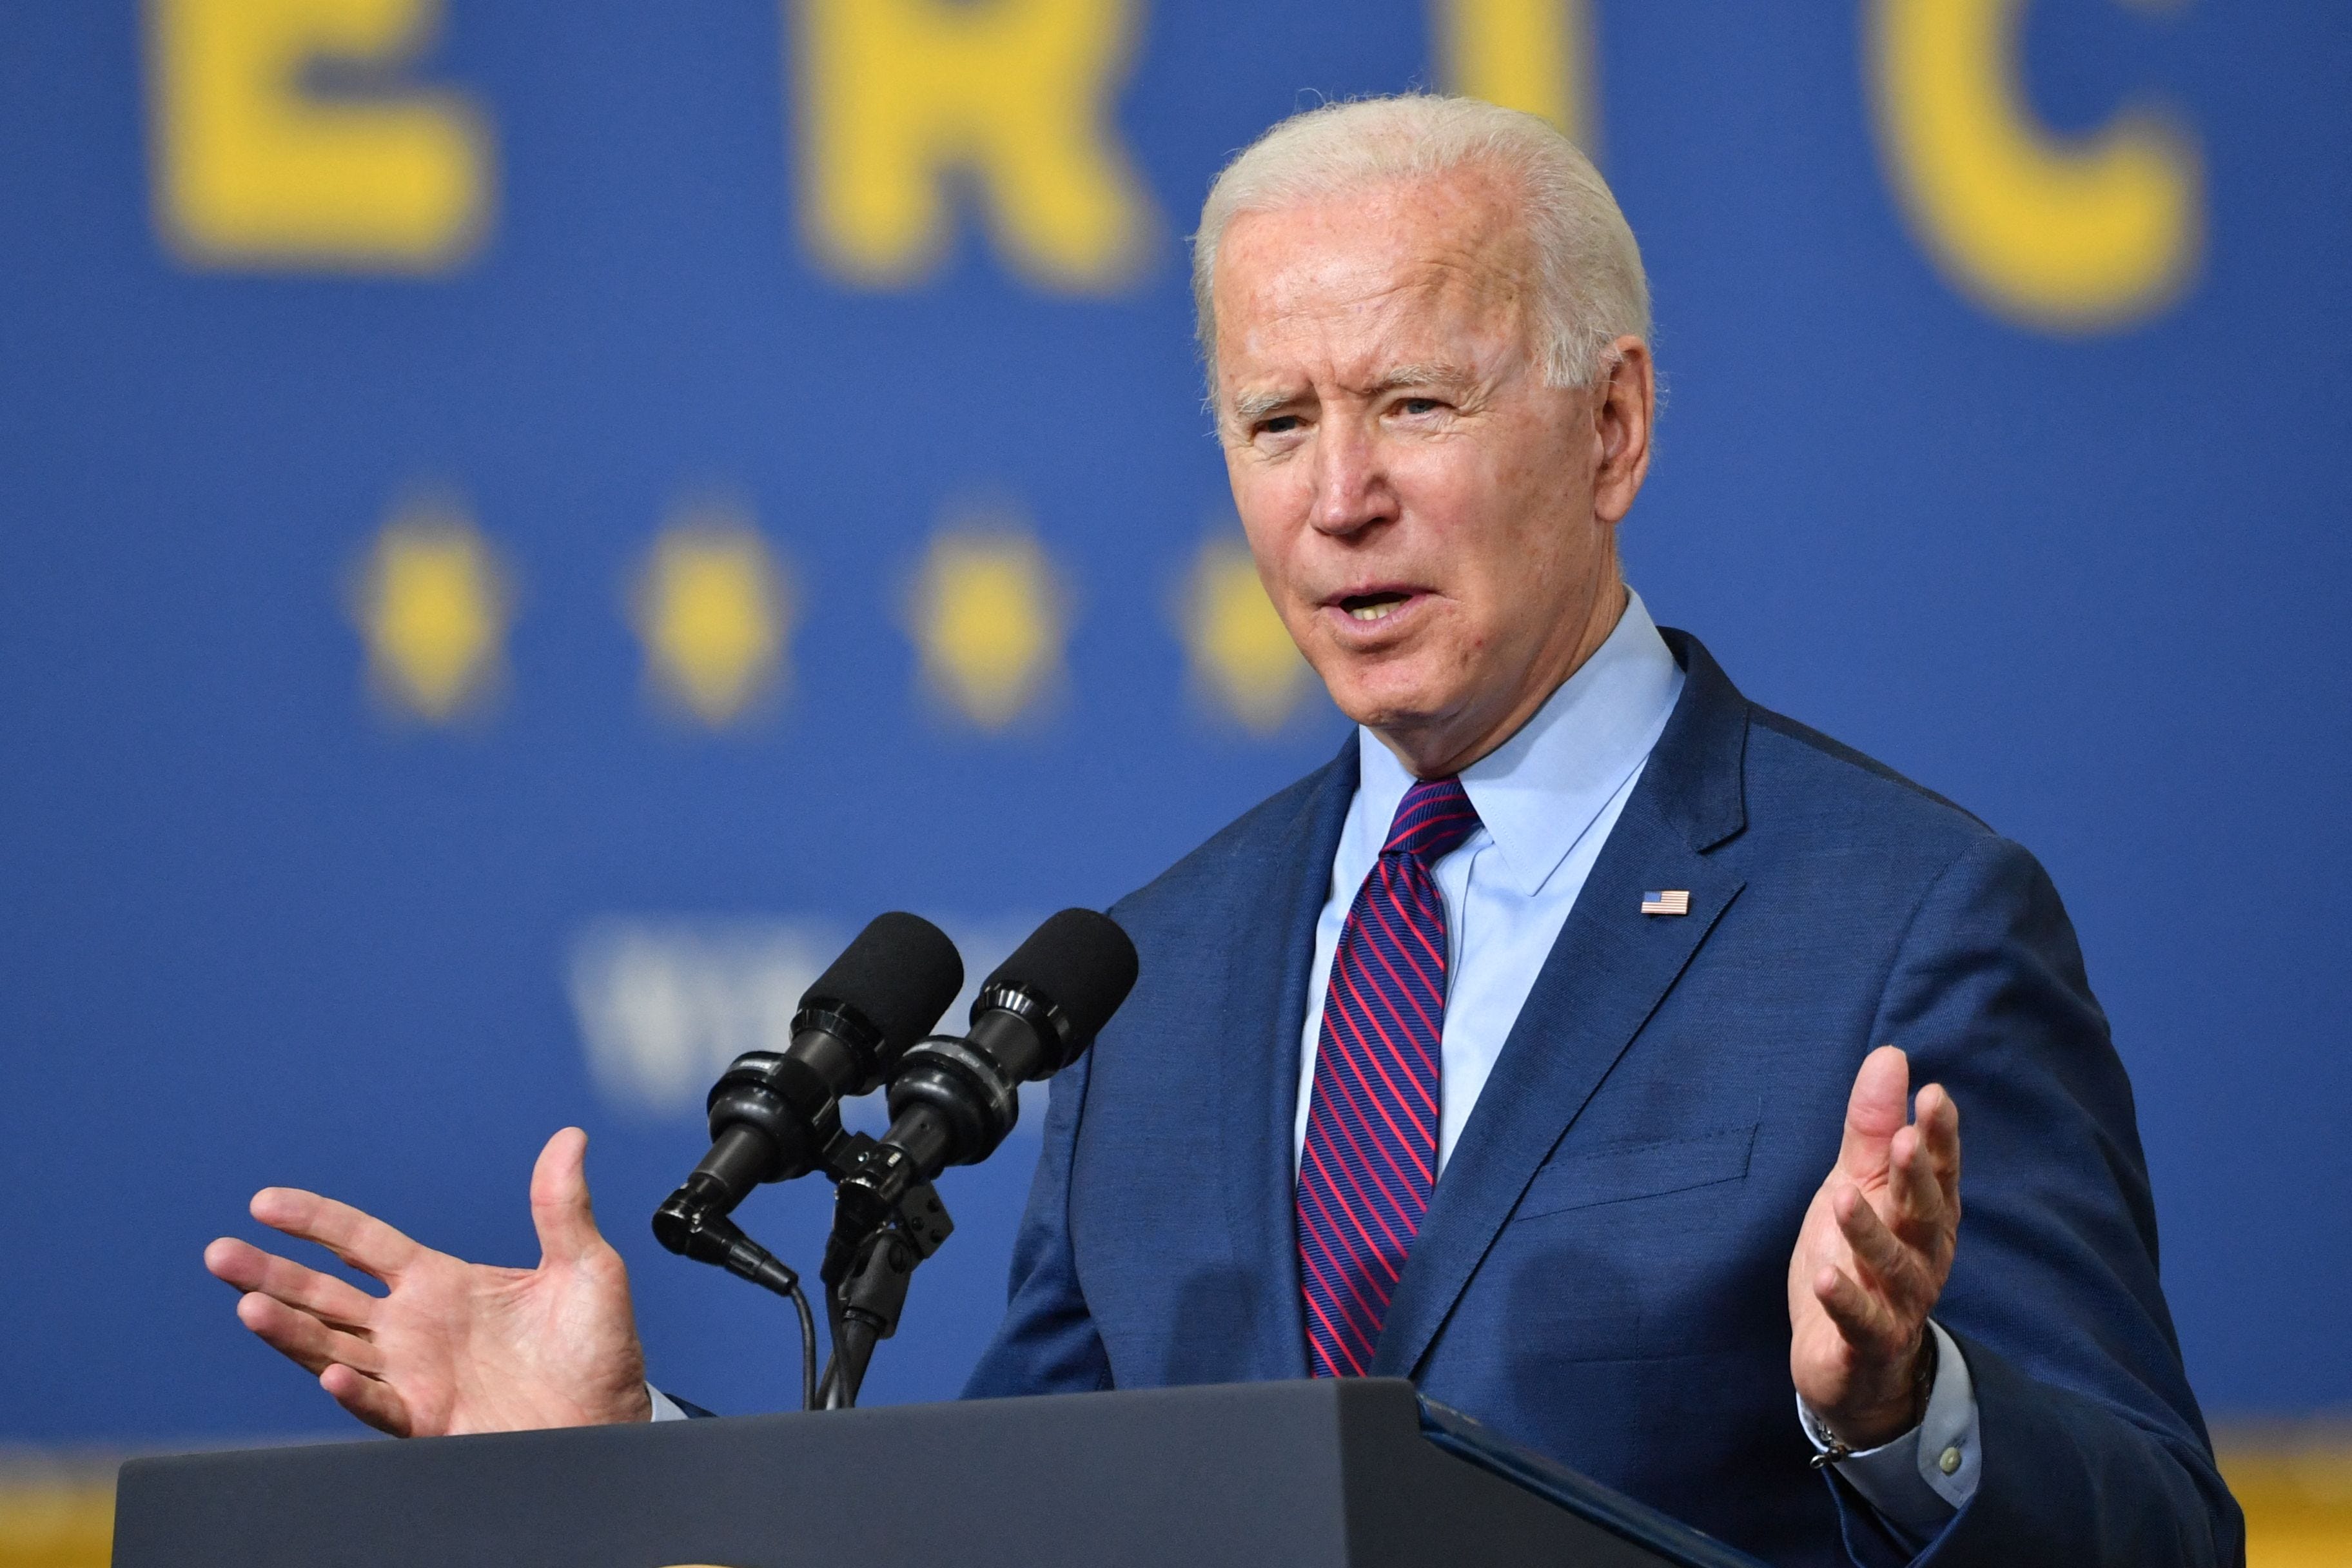 US President Joe Biden delivers remarks at the Ford Rouge Electric Vehicle Center, in Dearborn, Michigan on May 18, 2021.